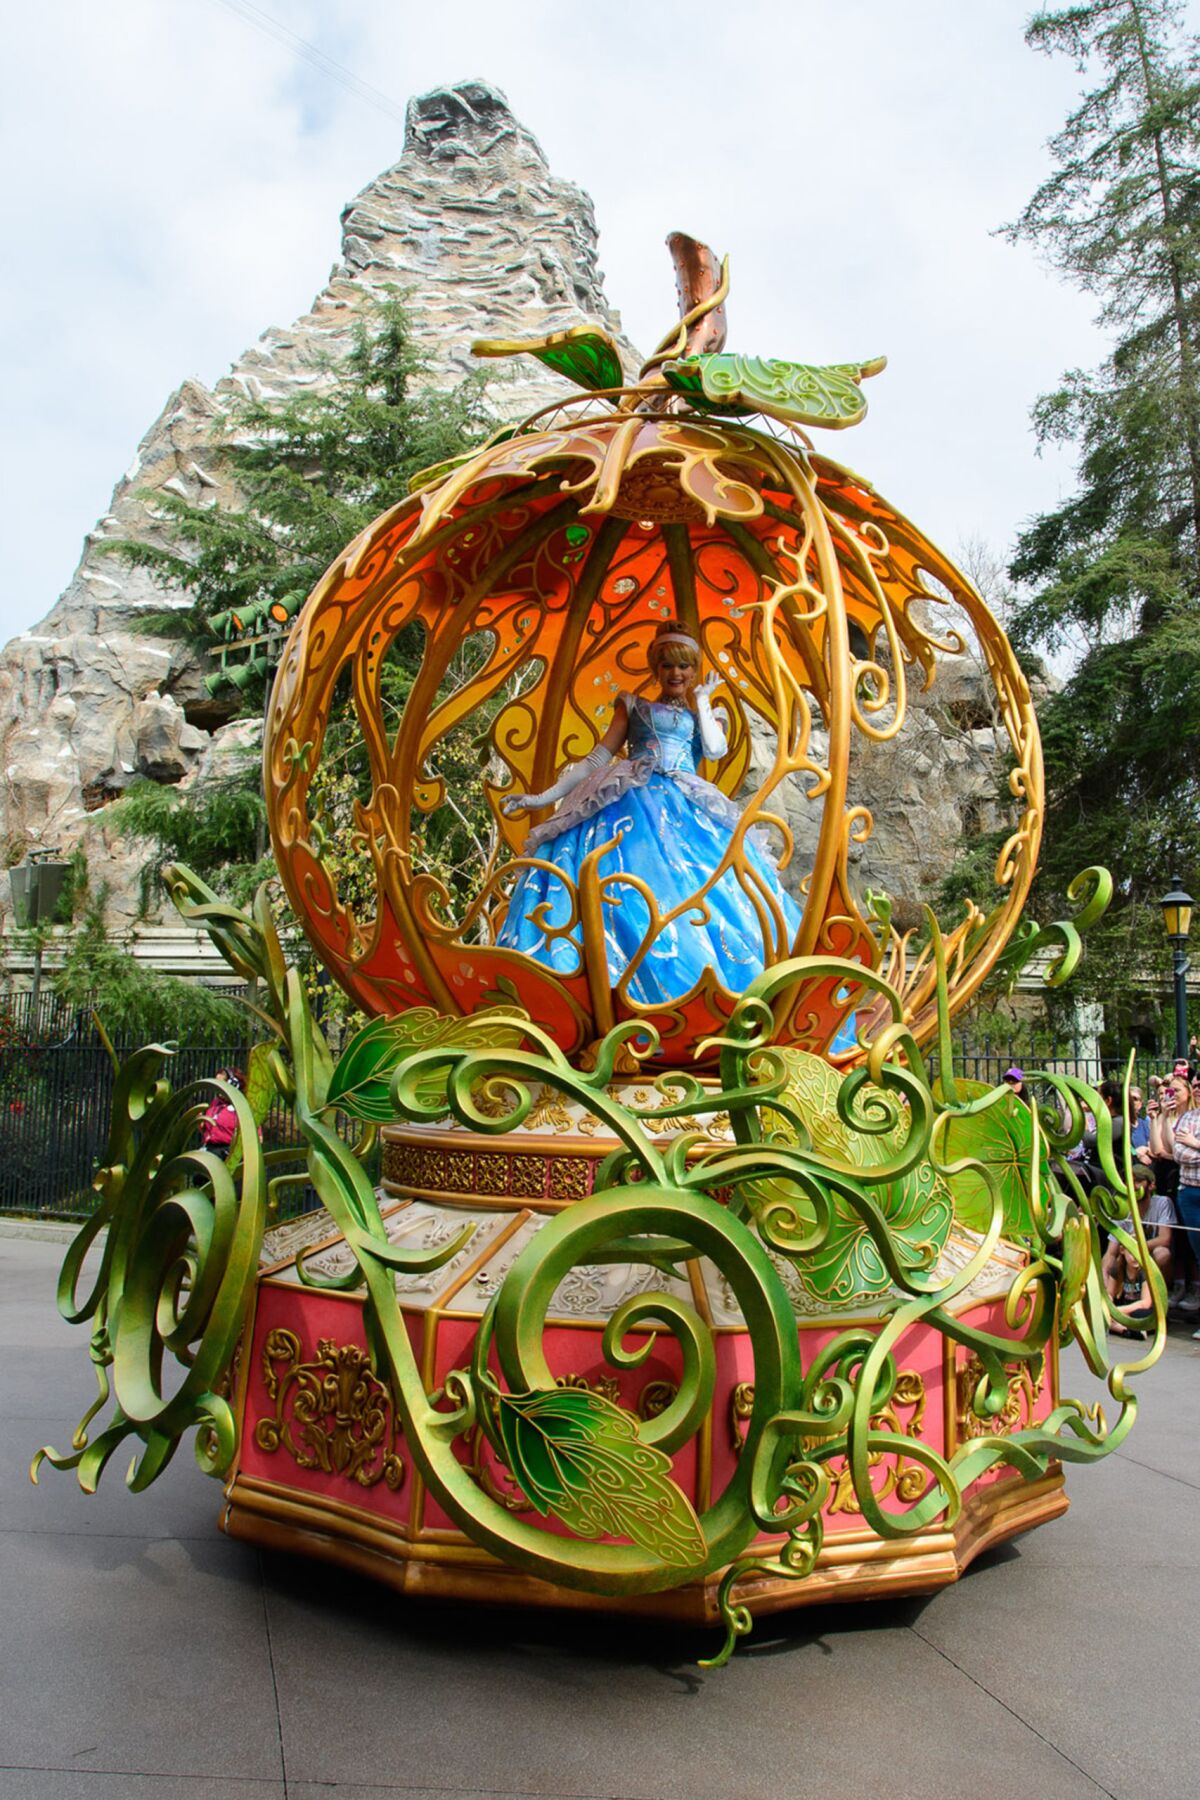 The Cinderella float in Disneyland's new “Magic Happens” parade, which debuted on Feb. 28, 2020.